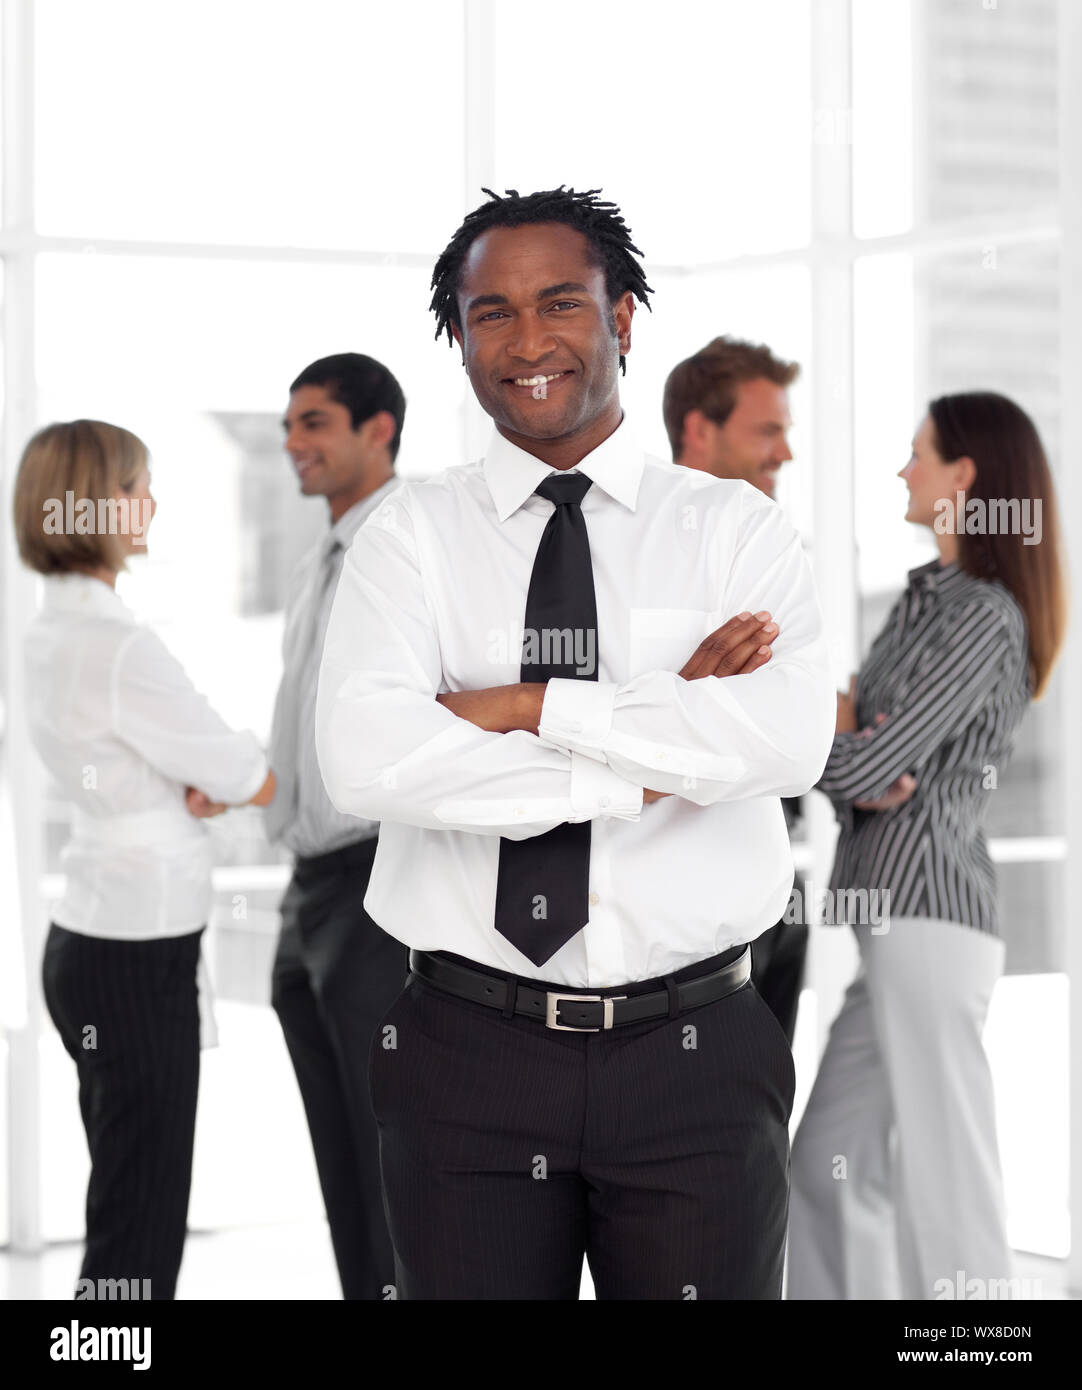 Business leader with his team Stock Photo